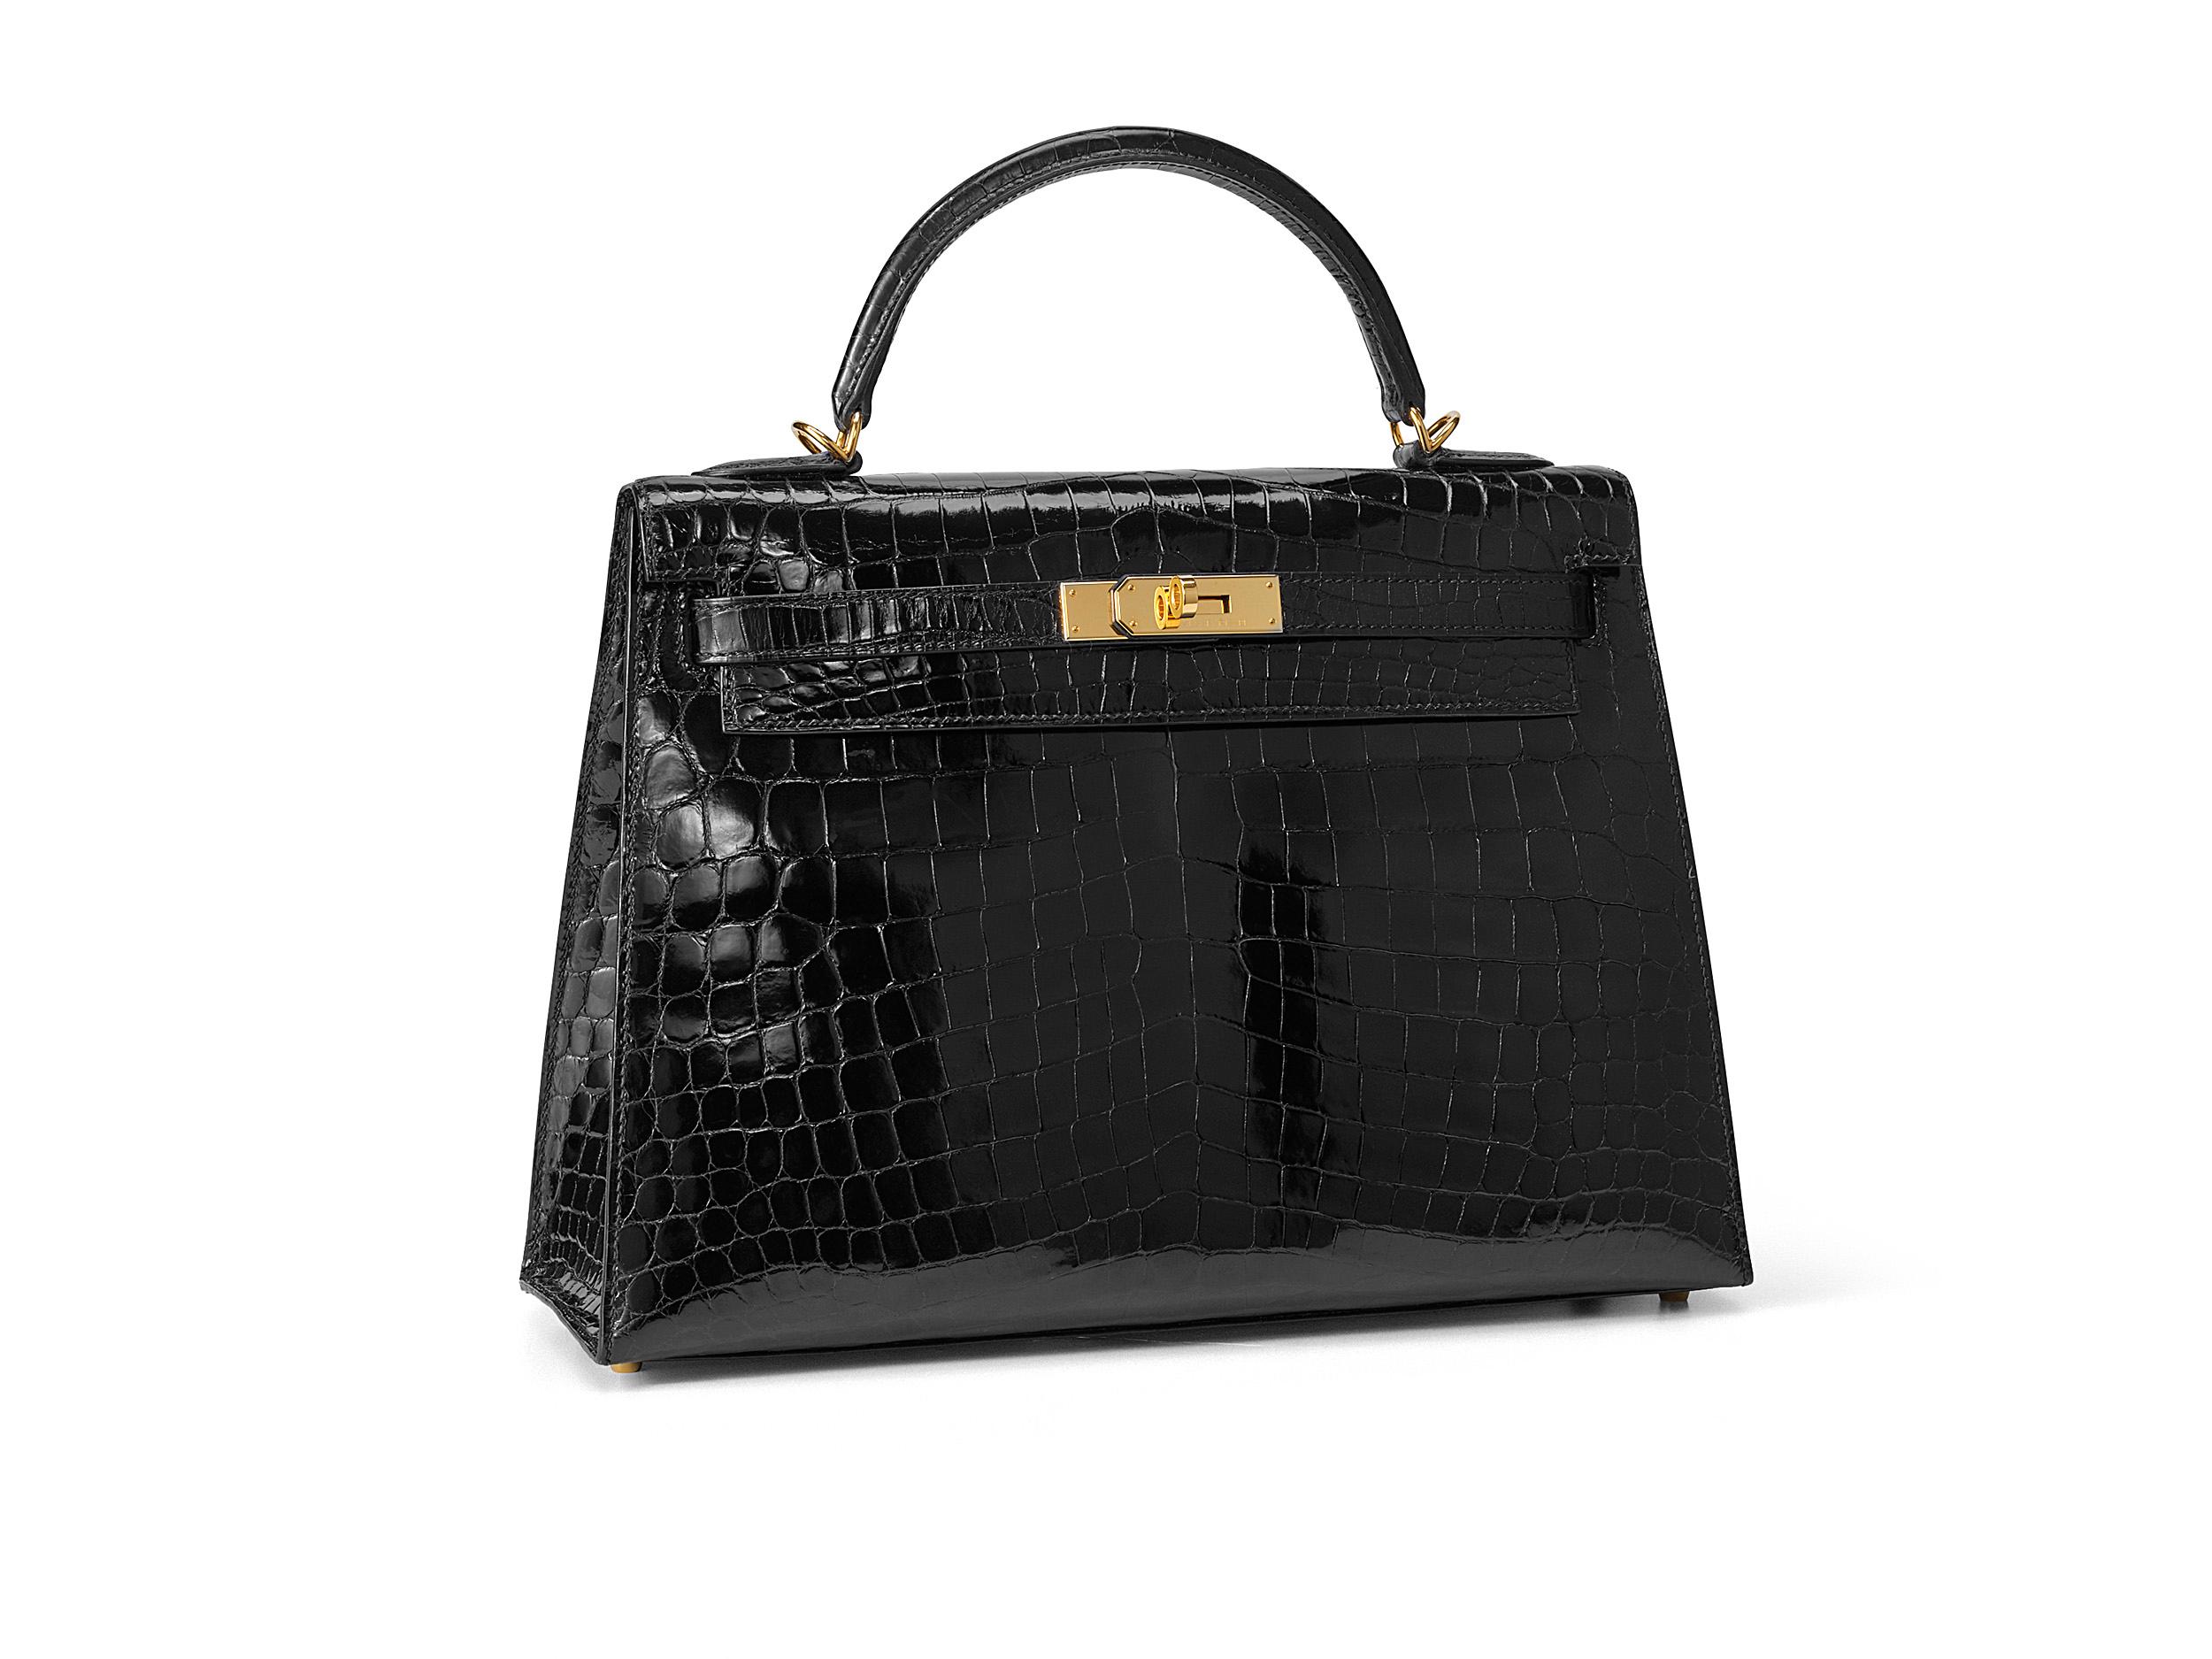 Hermès Kelly Sellier 32 in noir and niloticus crocodile leather with gold hardware. The bag has been worn but still in very good condition: small scratches on the hardware, small spots on front and back of the bag and small marks inside the bag.